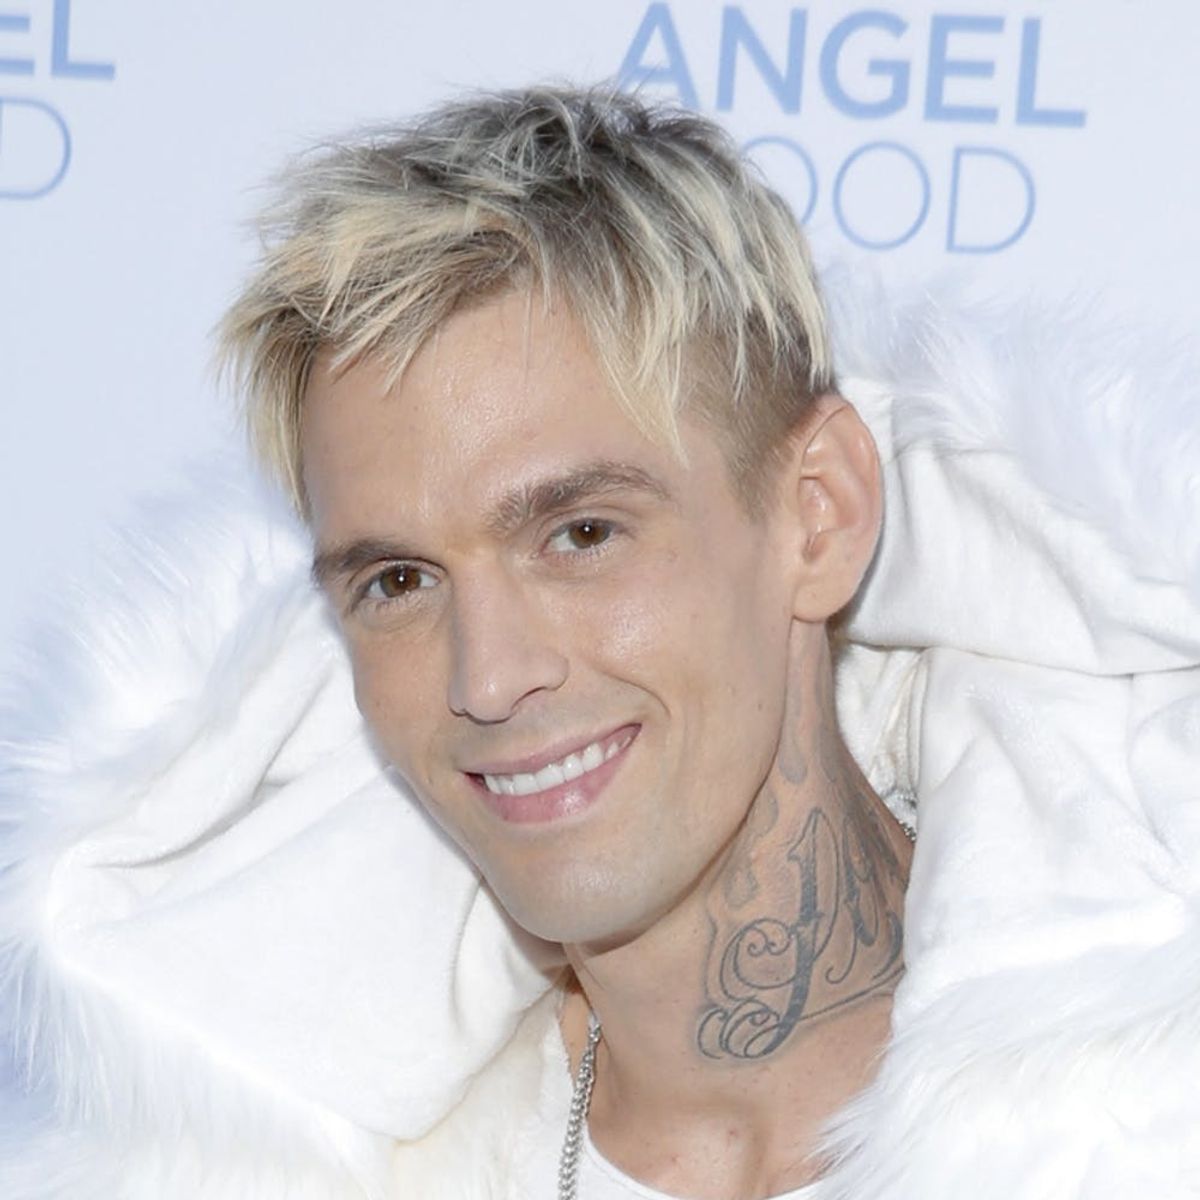 Aaron Carter Is Back in Rehab After Leaving to Take Care of “Legal and Financial” Matters